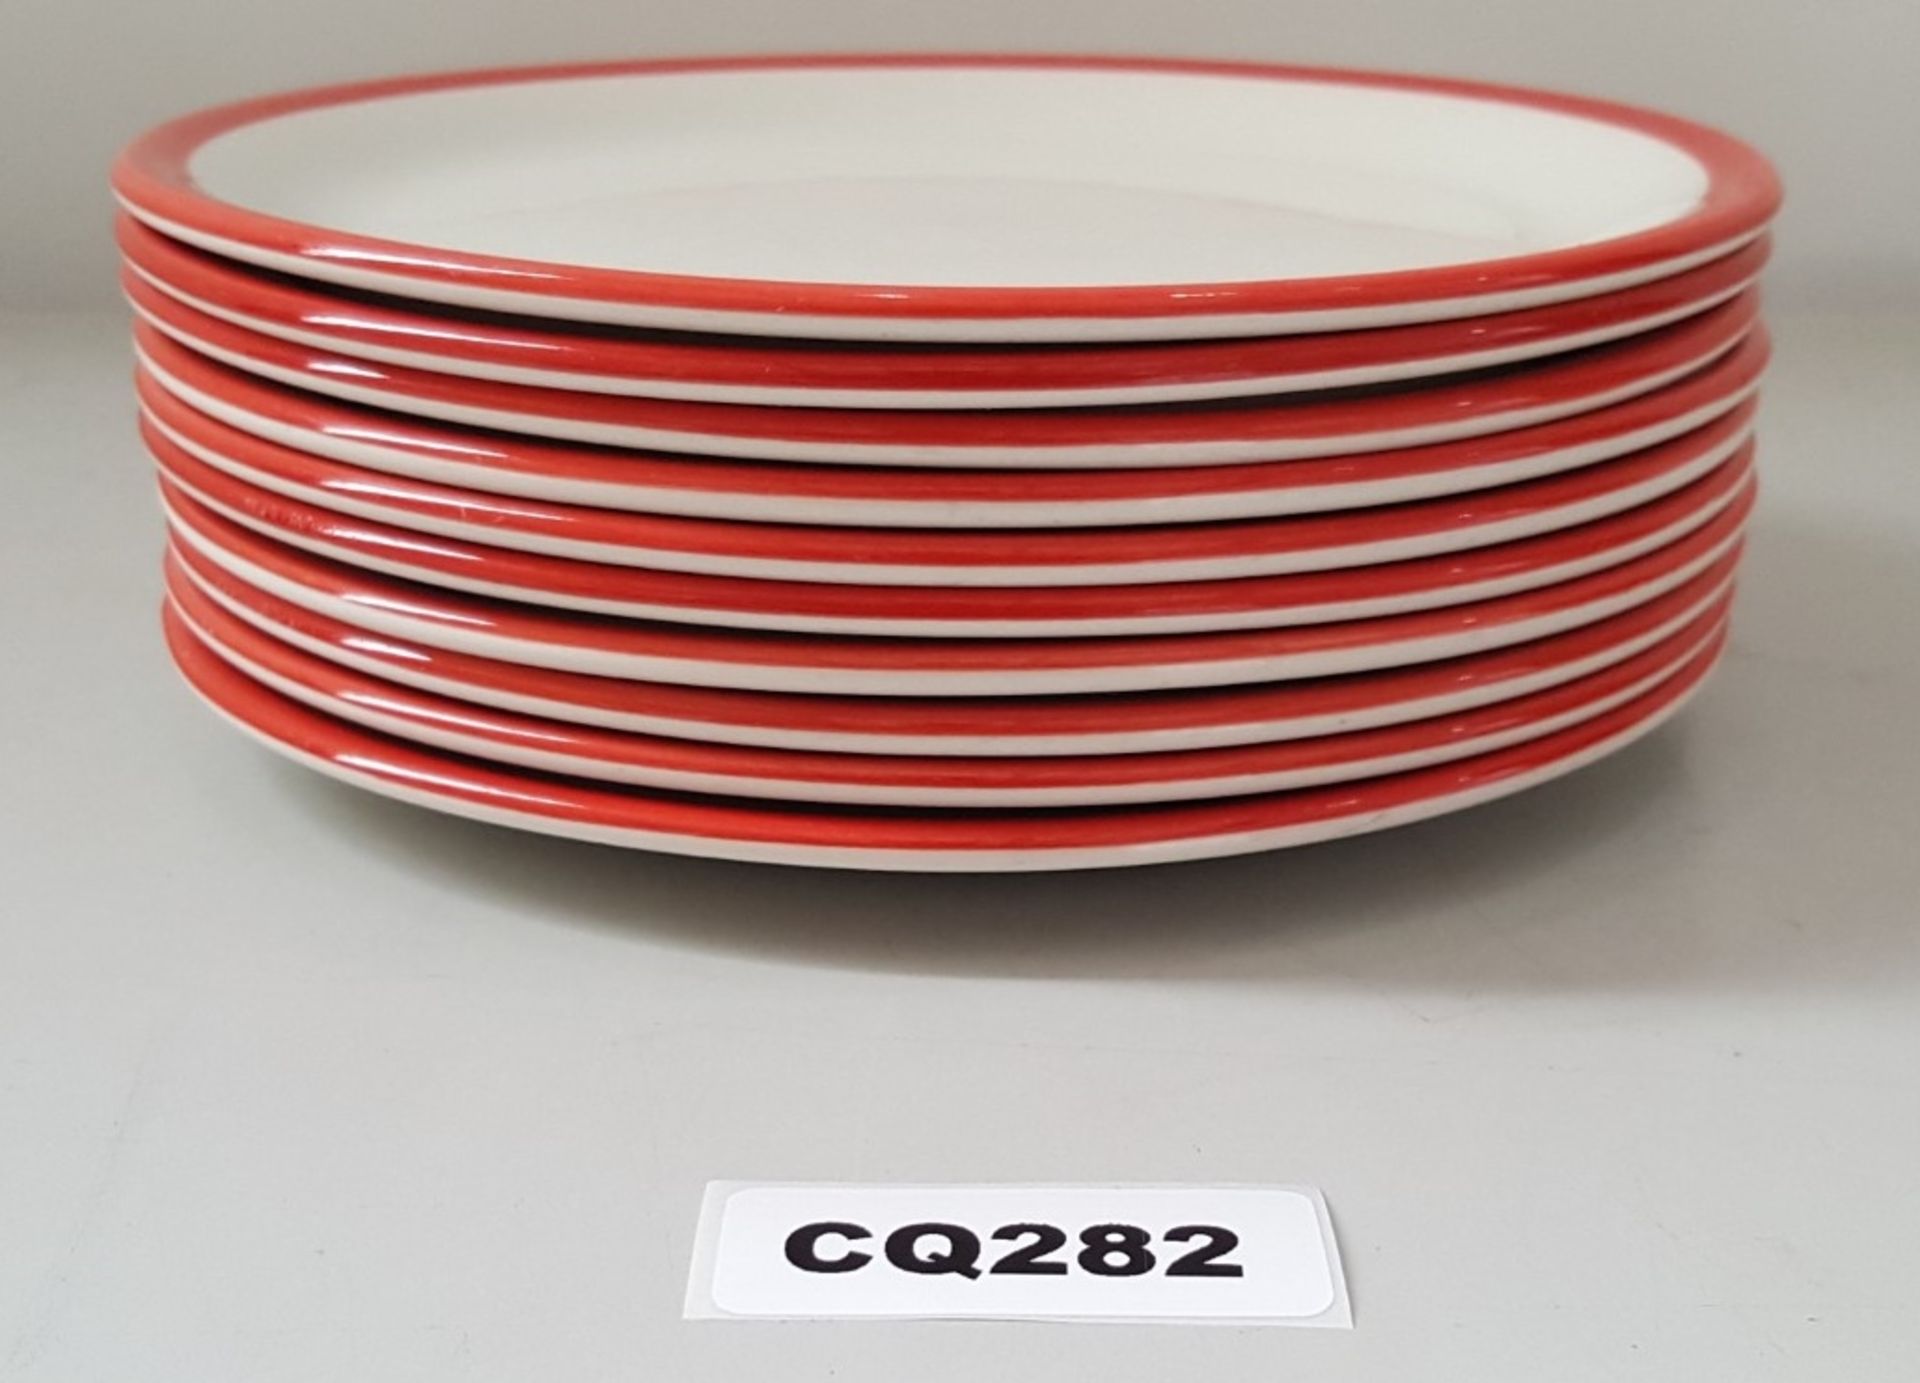 10 x Steelite Coupe Plates White With Red Outline Egde 20CM - Ref CQ282 - Image 2 of 4